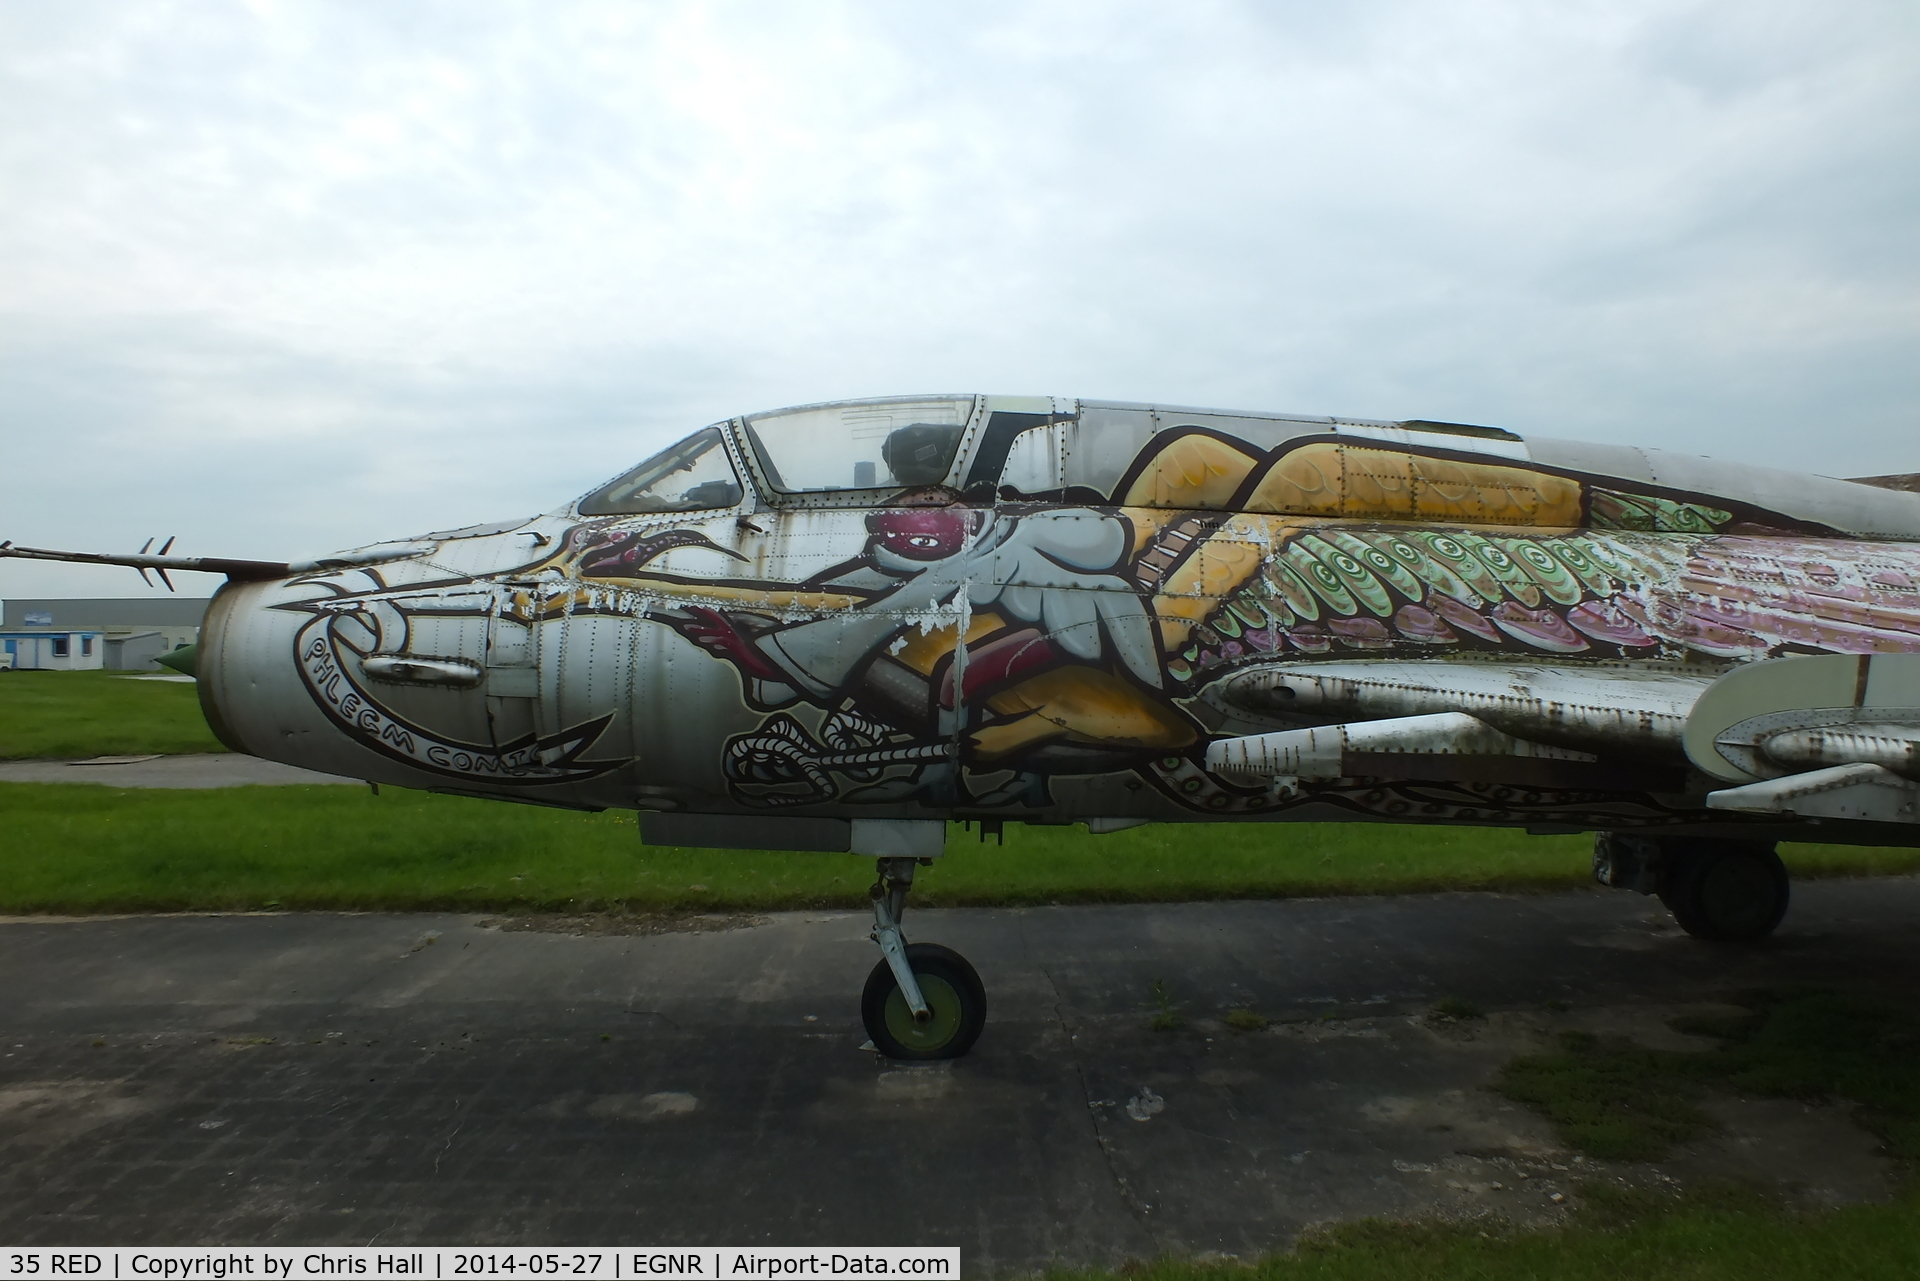 35 RED, Sukhoi Su-17M C/N 25102, close up of the nose art